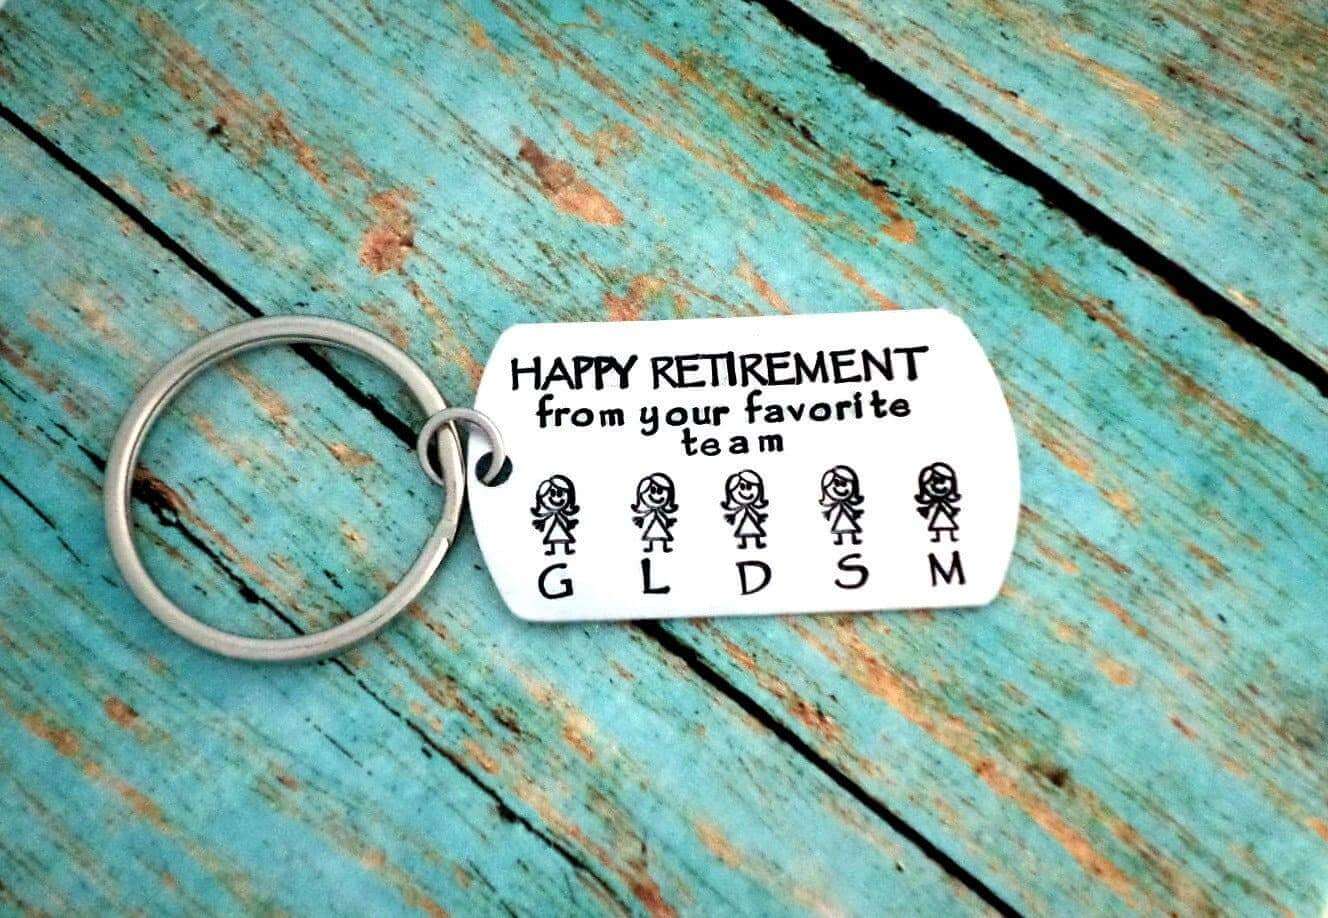 A Fond Farewell: 5 Great Retirement Gifts for Coworkers - Blog